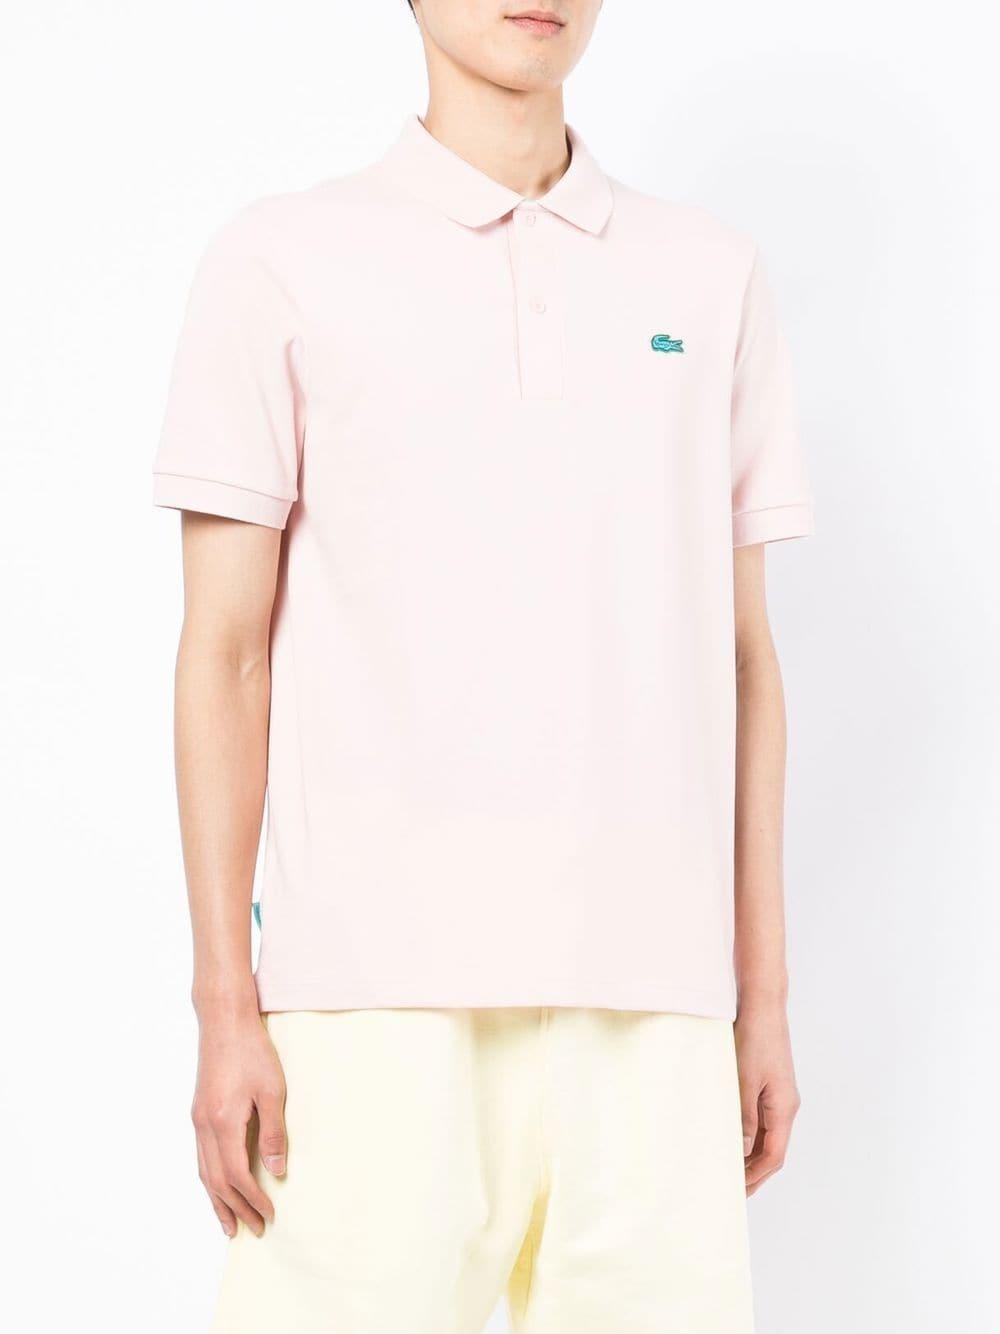 Lacoste Cotton Crocodile-patch Polo Shirt in Pink for Men - Save 10% | Lyst